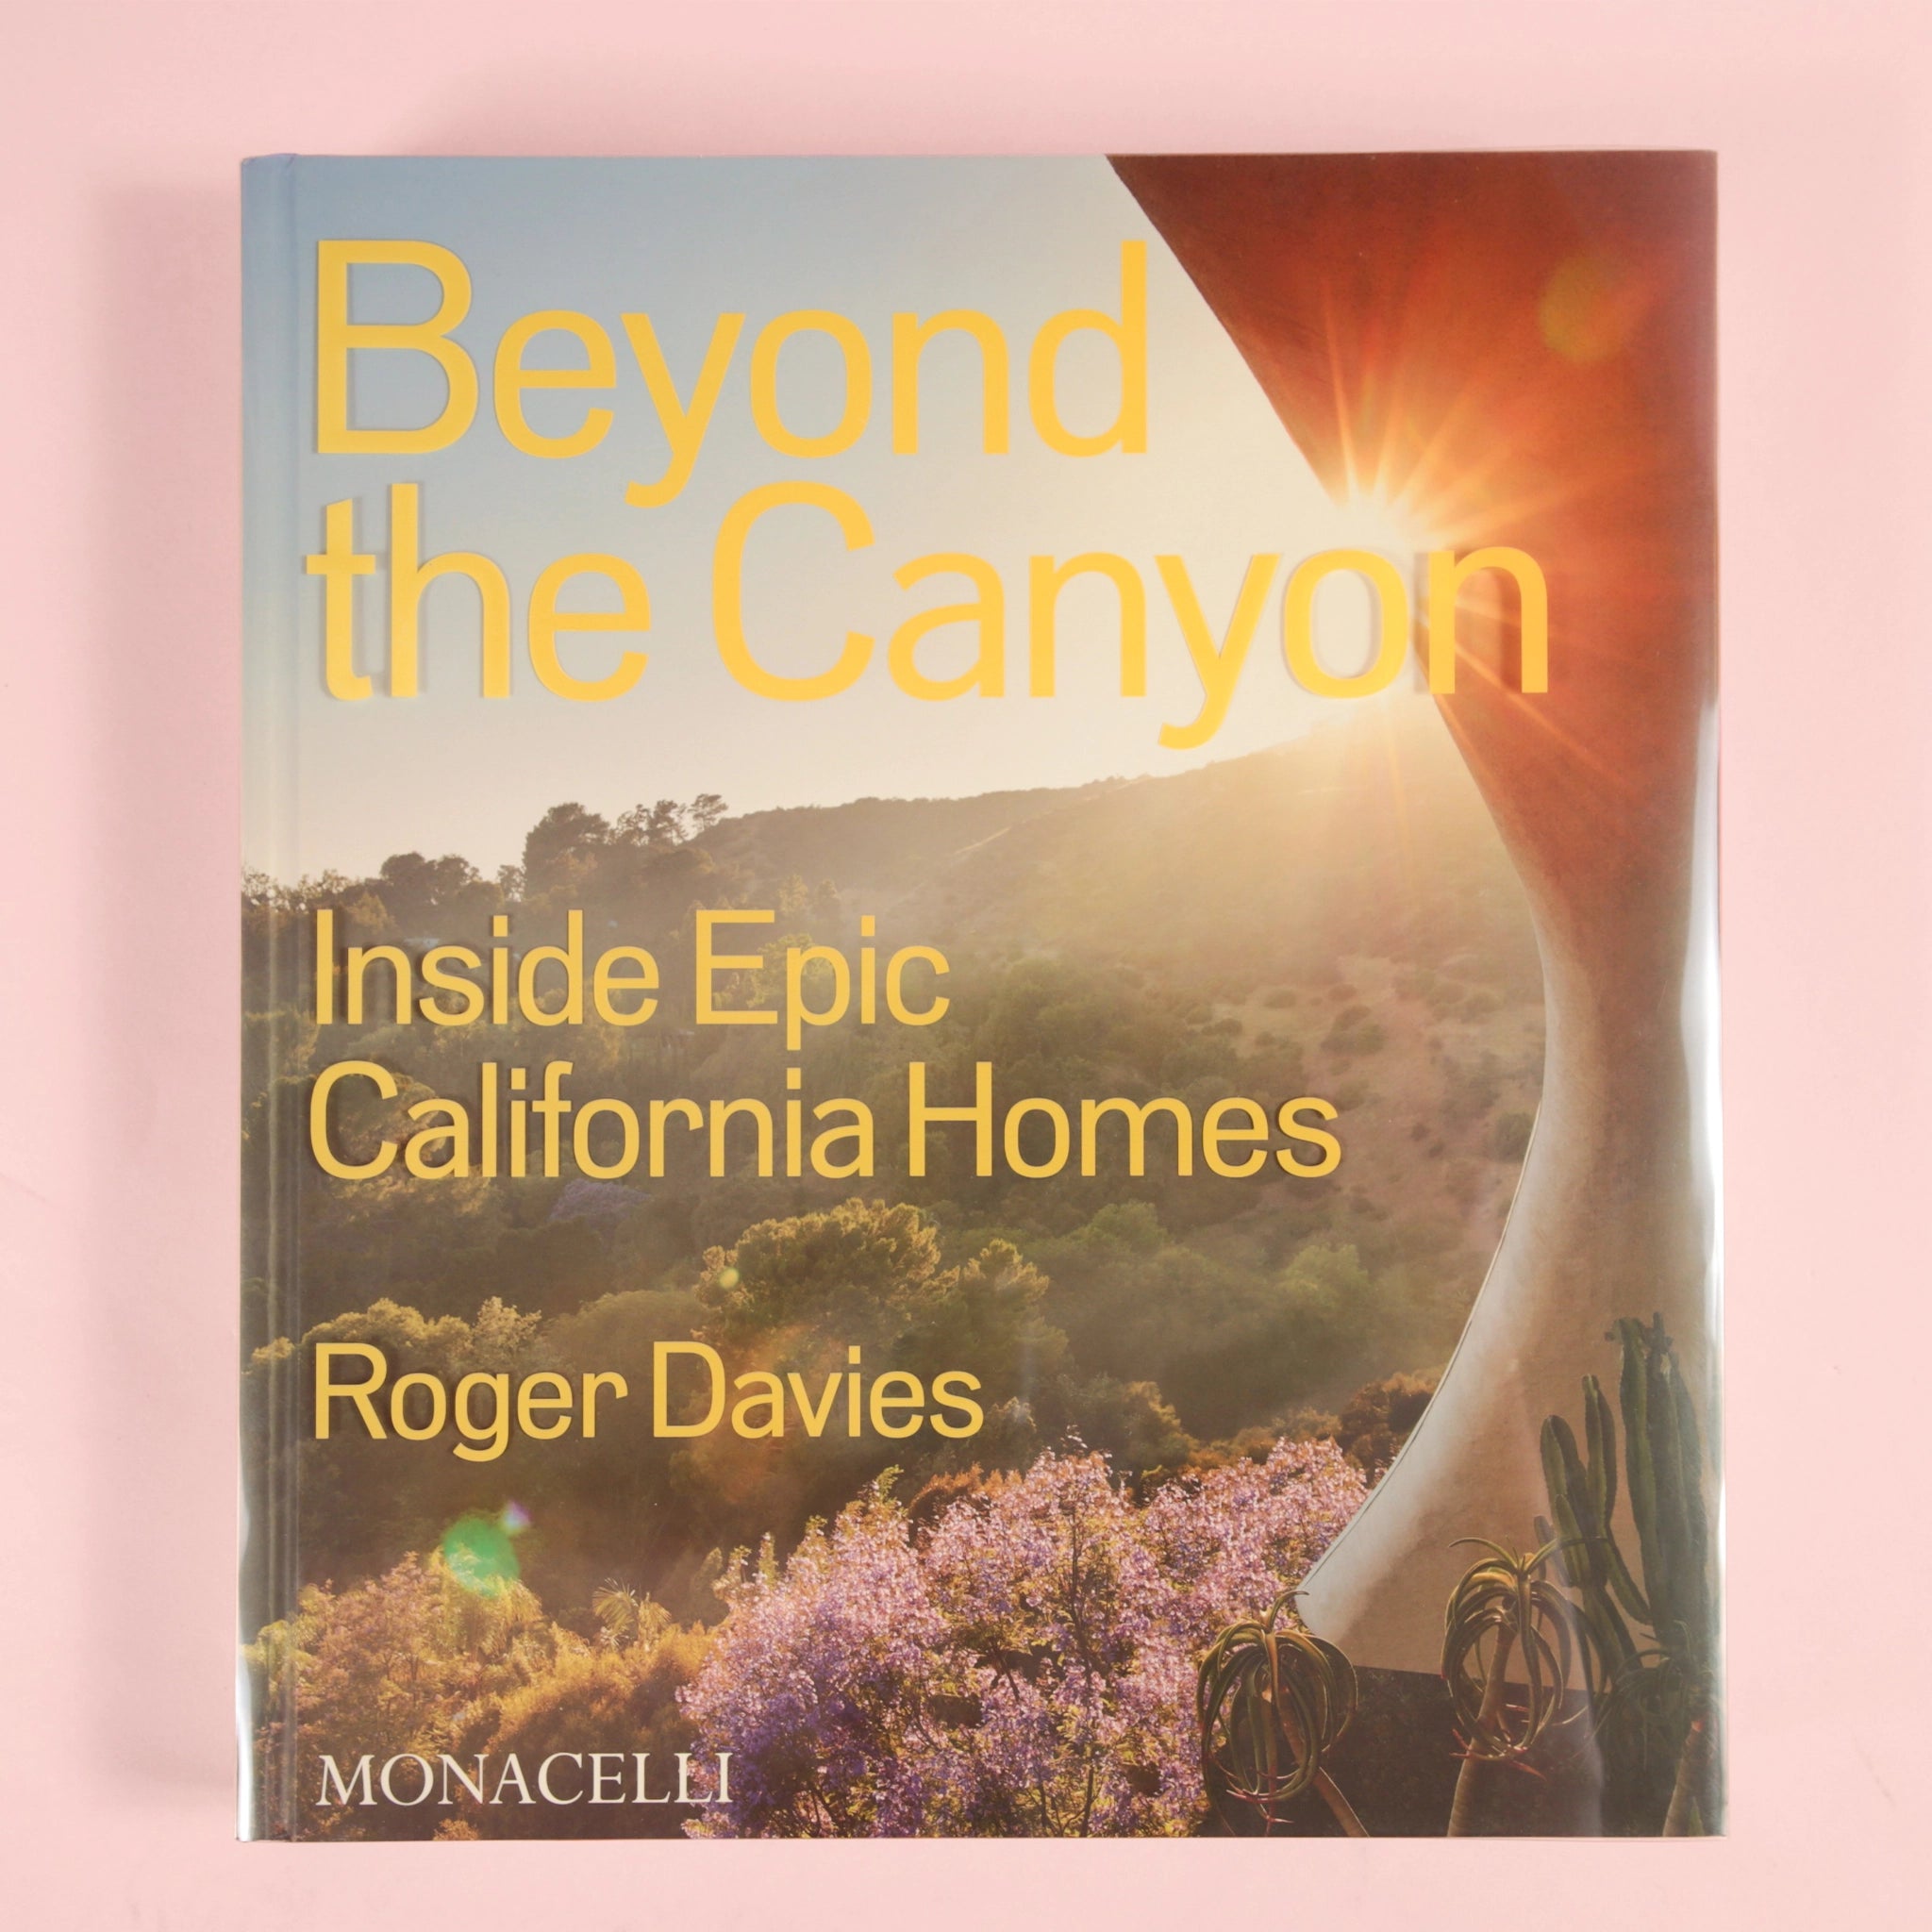 On a light pink background is a book cover with a photograph of a canyon and the title that reads, "Beyond the Canyon Inside Epic California Homes" in yellow letters. 